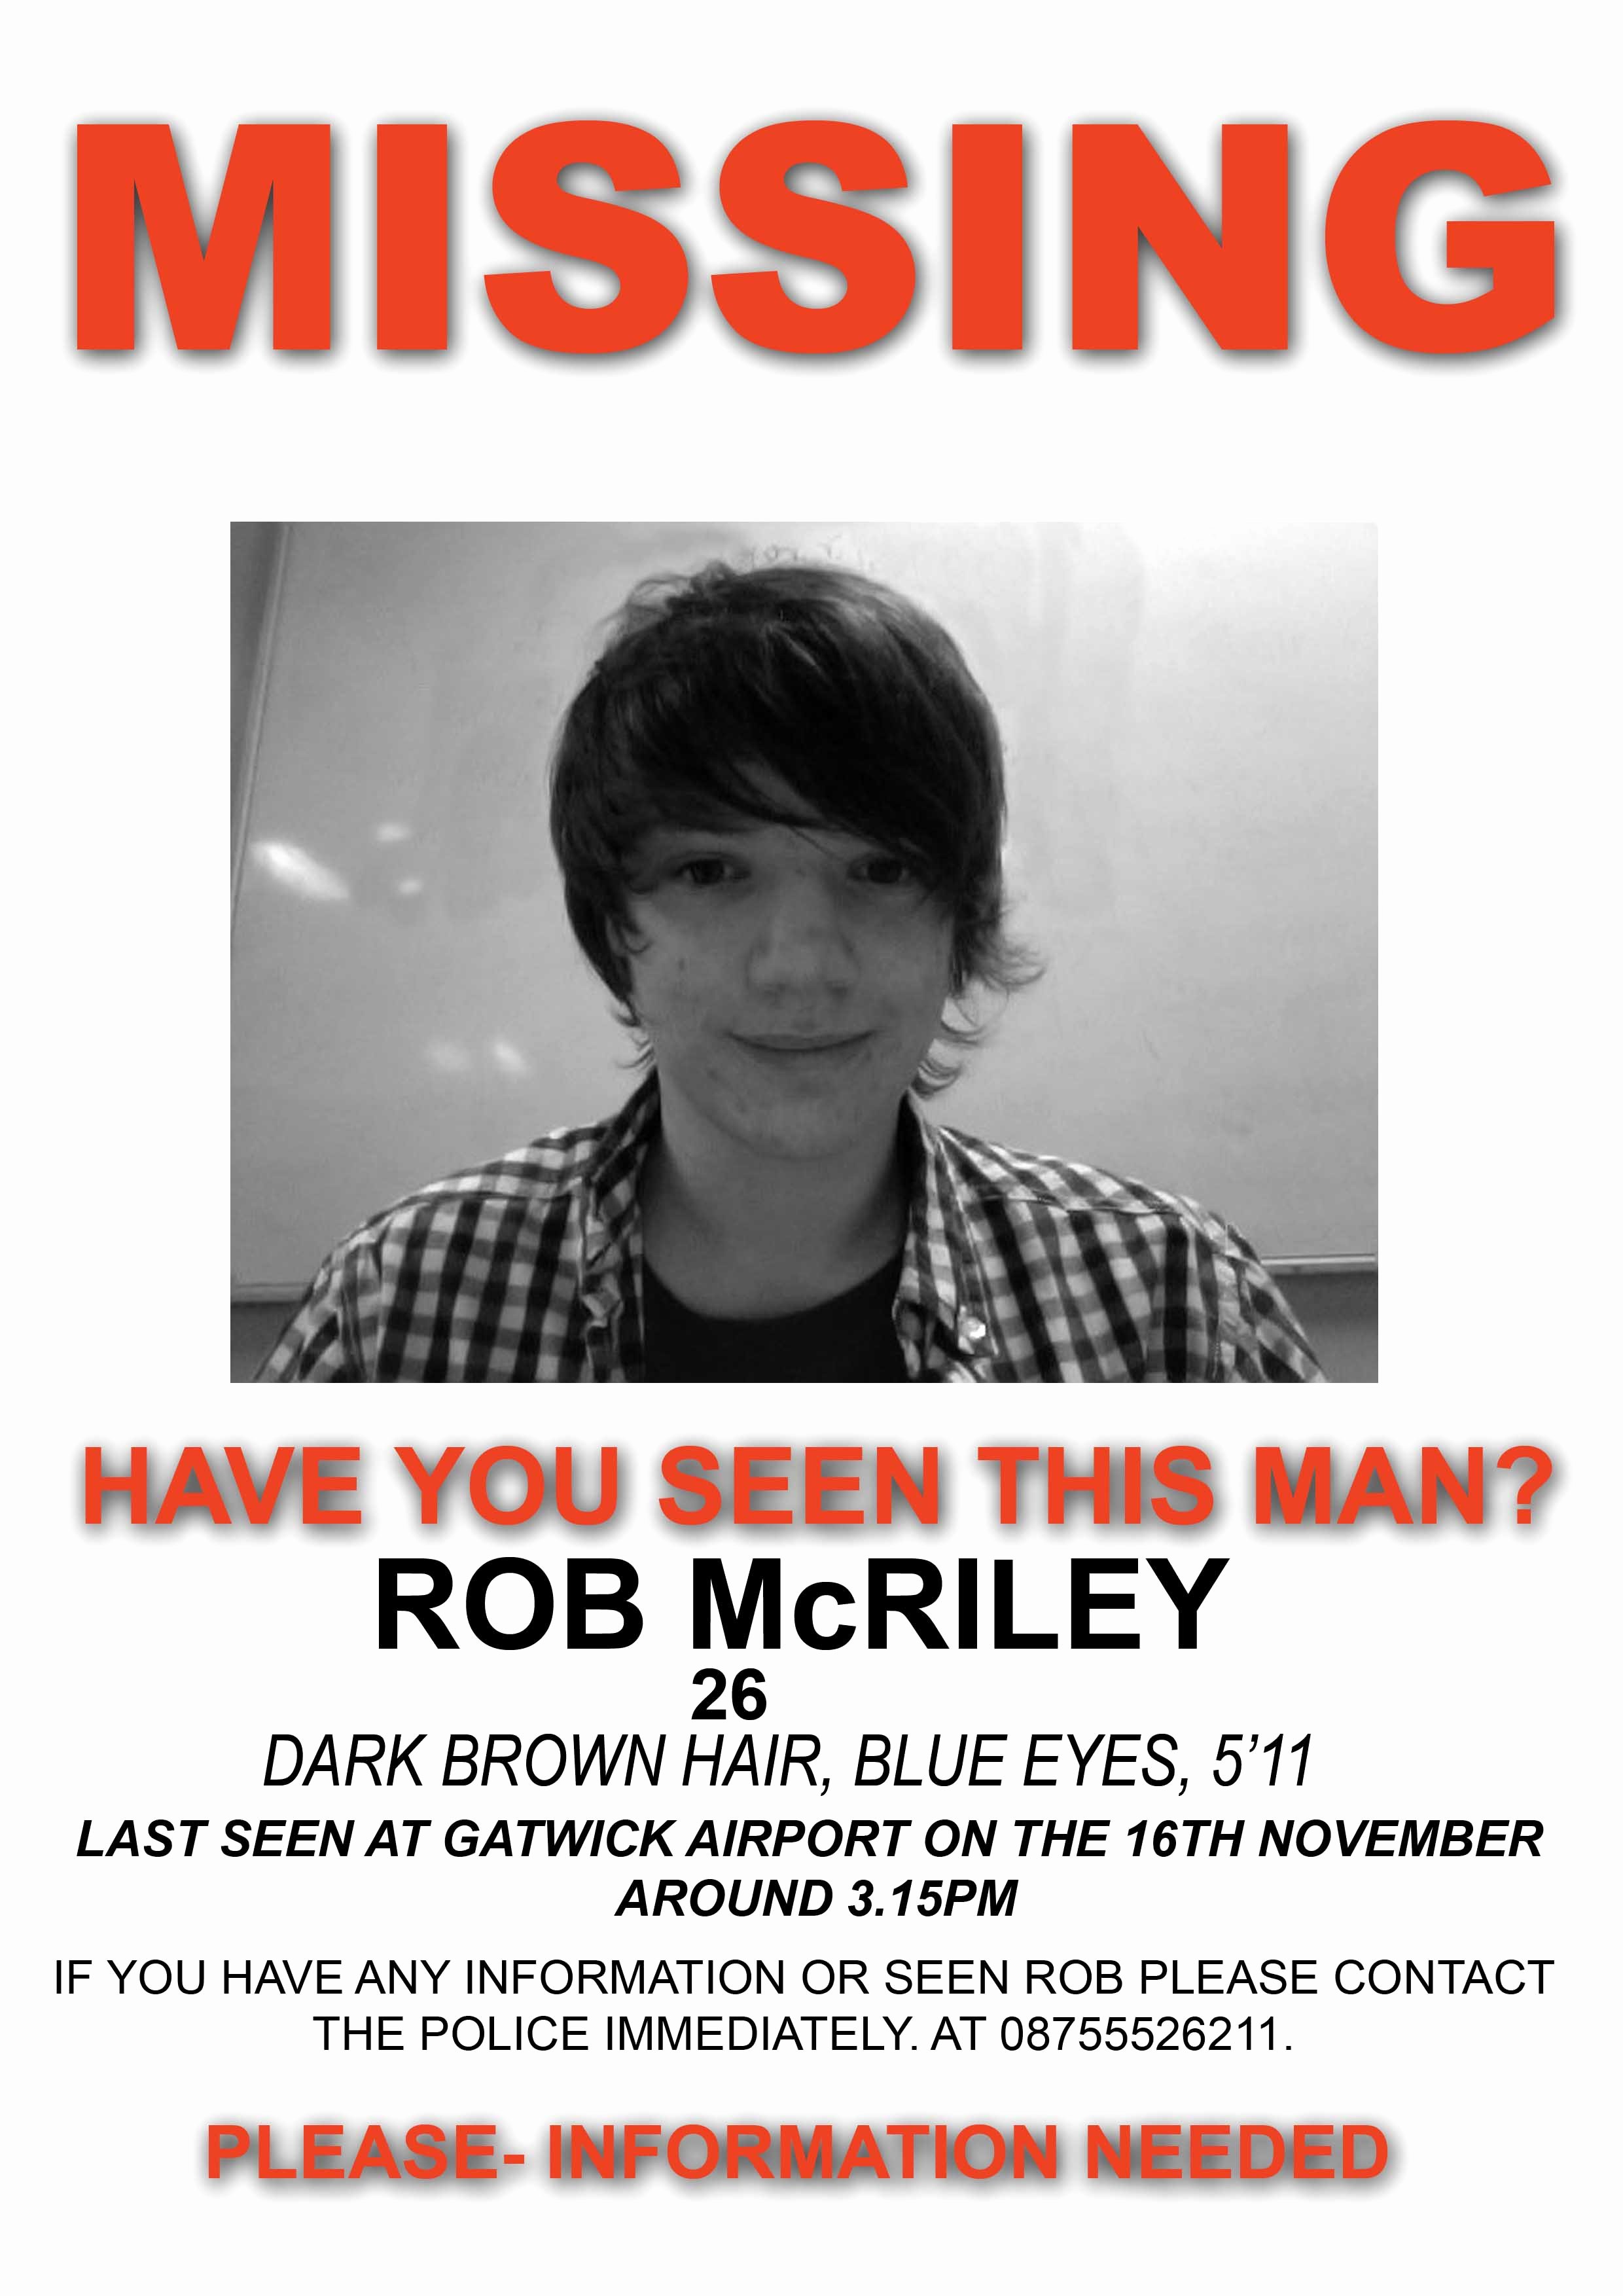 Missing Person Flyer Template Fresh Creating A Missing Poster for Rob Mcriley Post 1